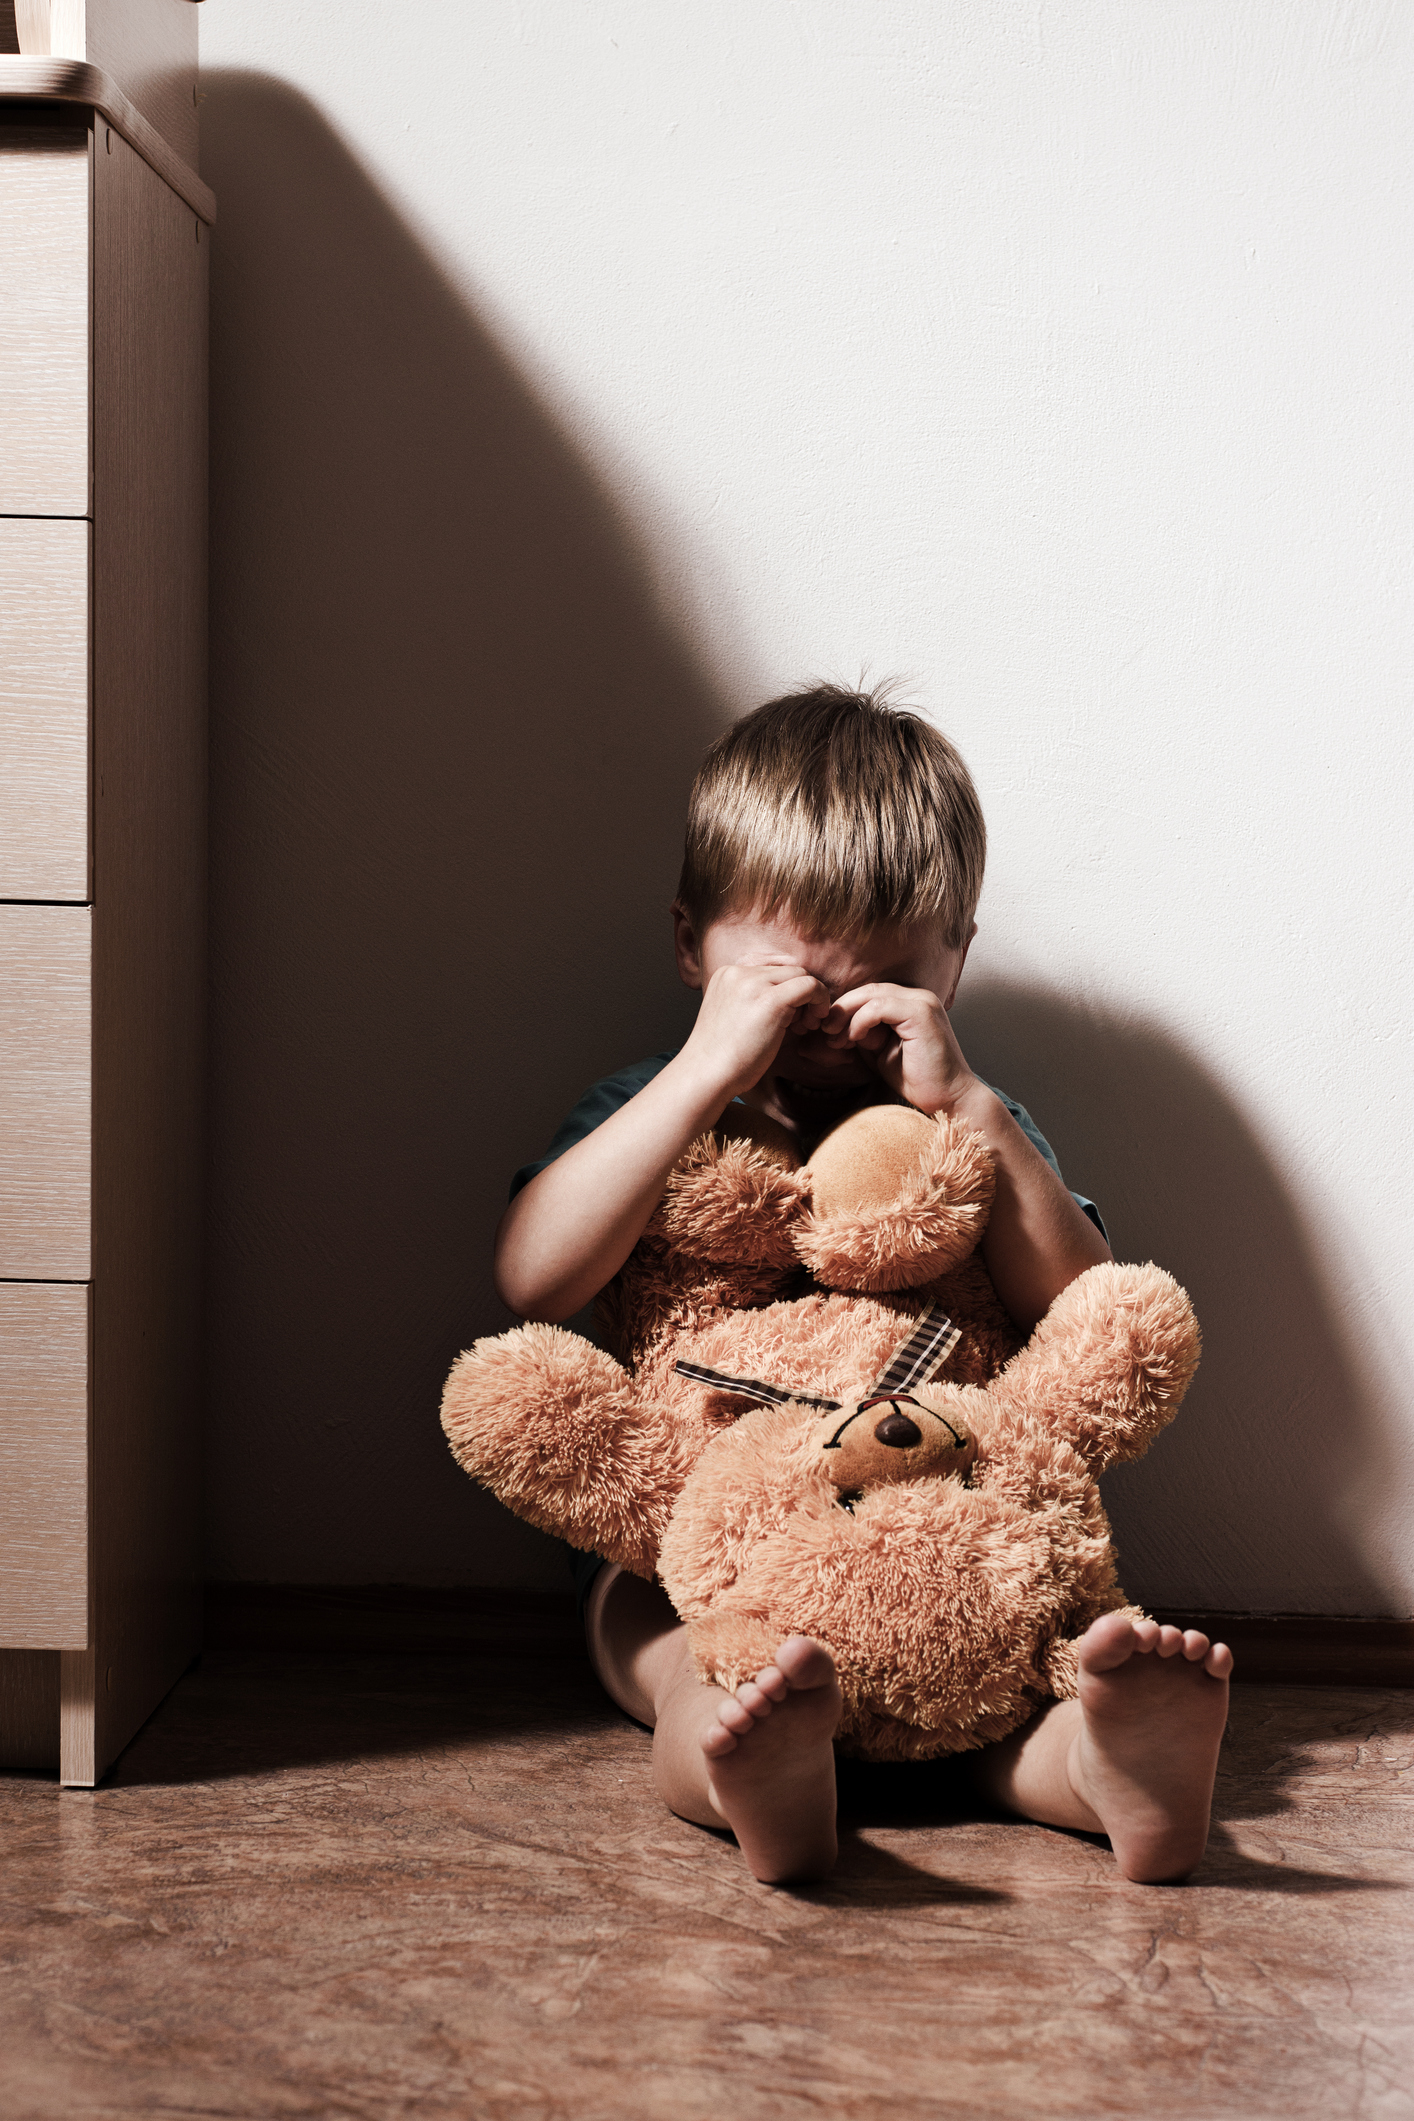 Child sitting on the floor, covering eyes, holding a teddy bear, with a shadow on the wall